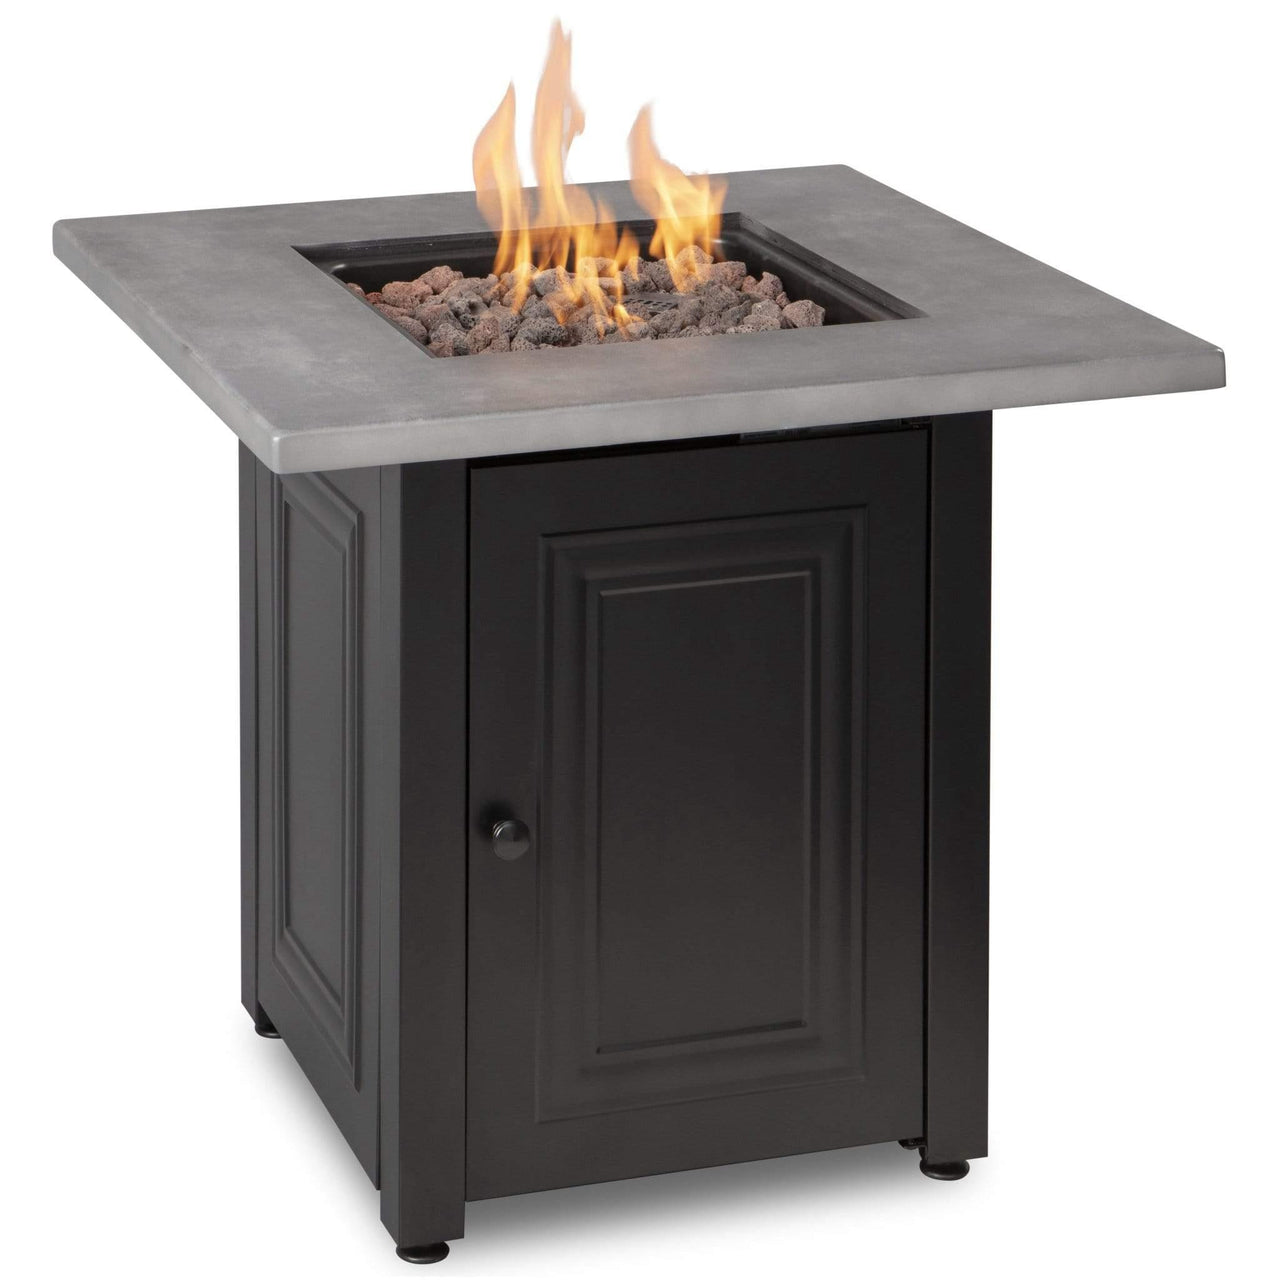 Endless Summer The Wakefield, LP Gas Outdoor Fire Pit with Concrete Resin Mantel - GAD15410M - Fire Pit Stock